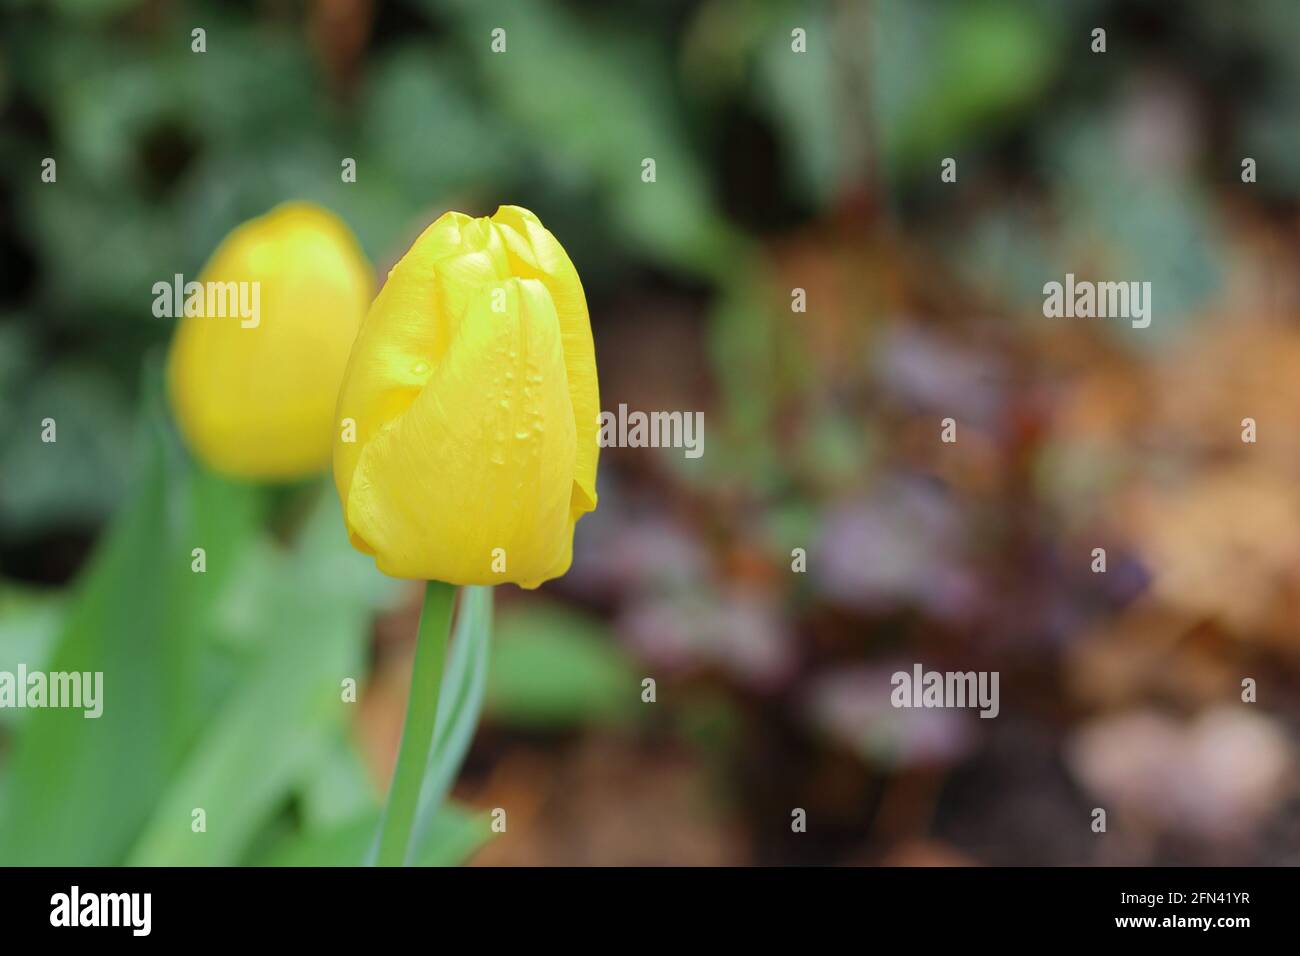 close up of a tulip flower Stock Photo